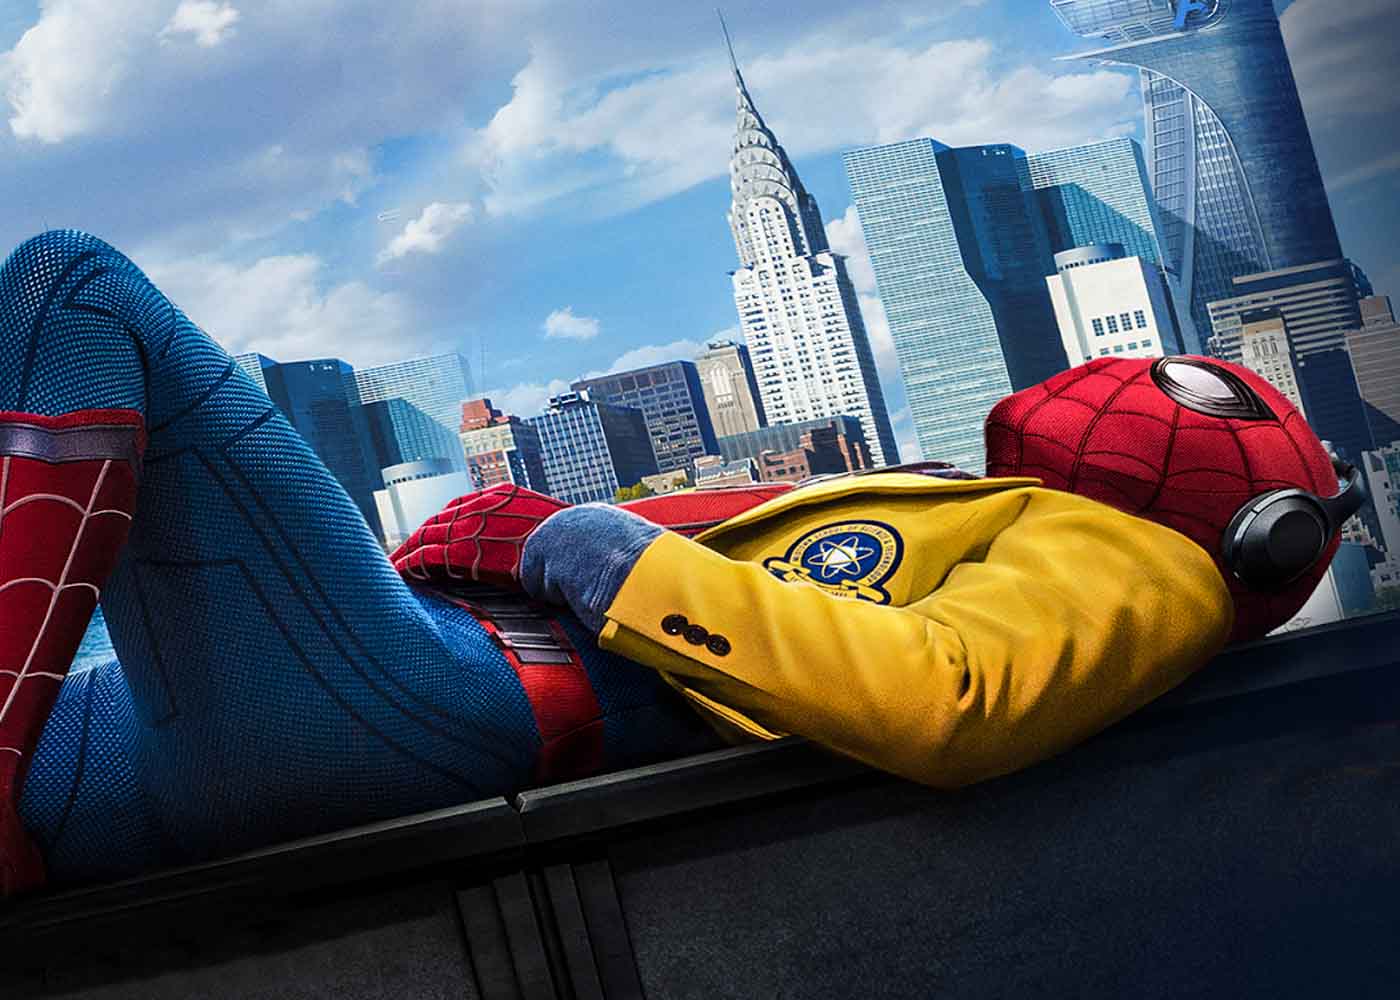 New Spider-Man: Homecoming Footage Shown During MTV Movie Awards.